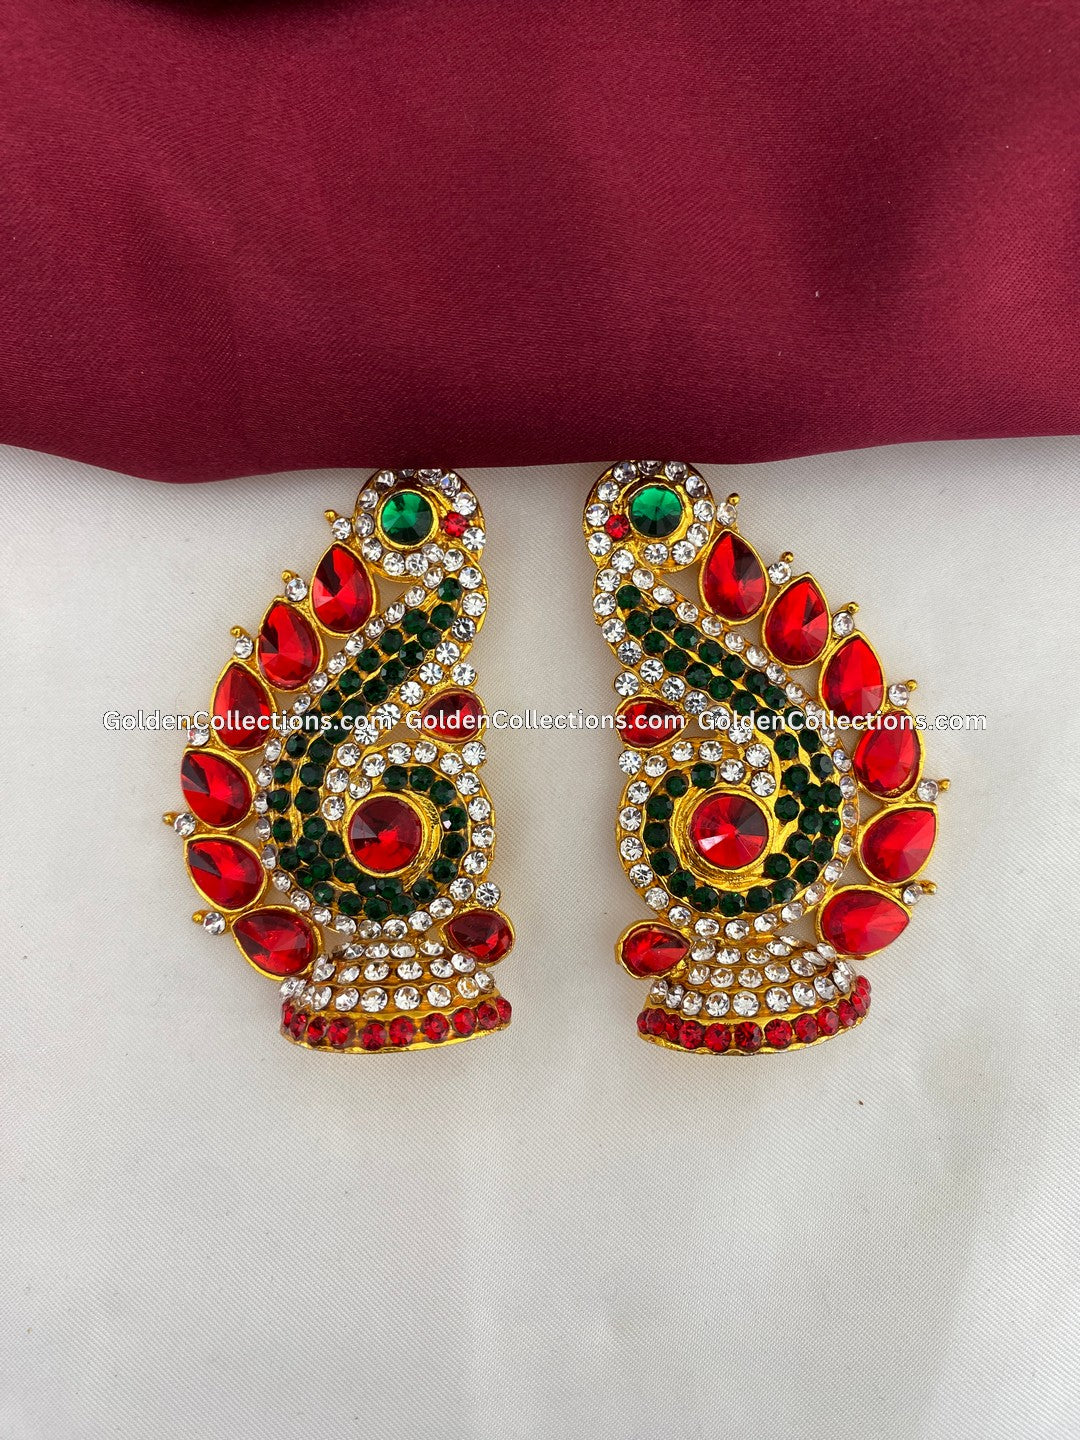 Divine Earrings Online - GoldenCollections DGE-099